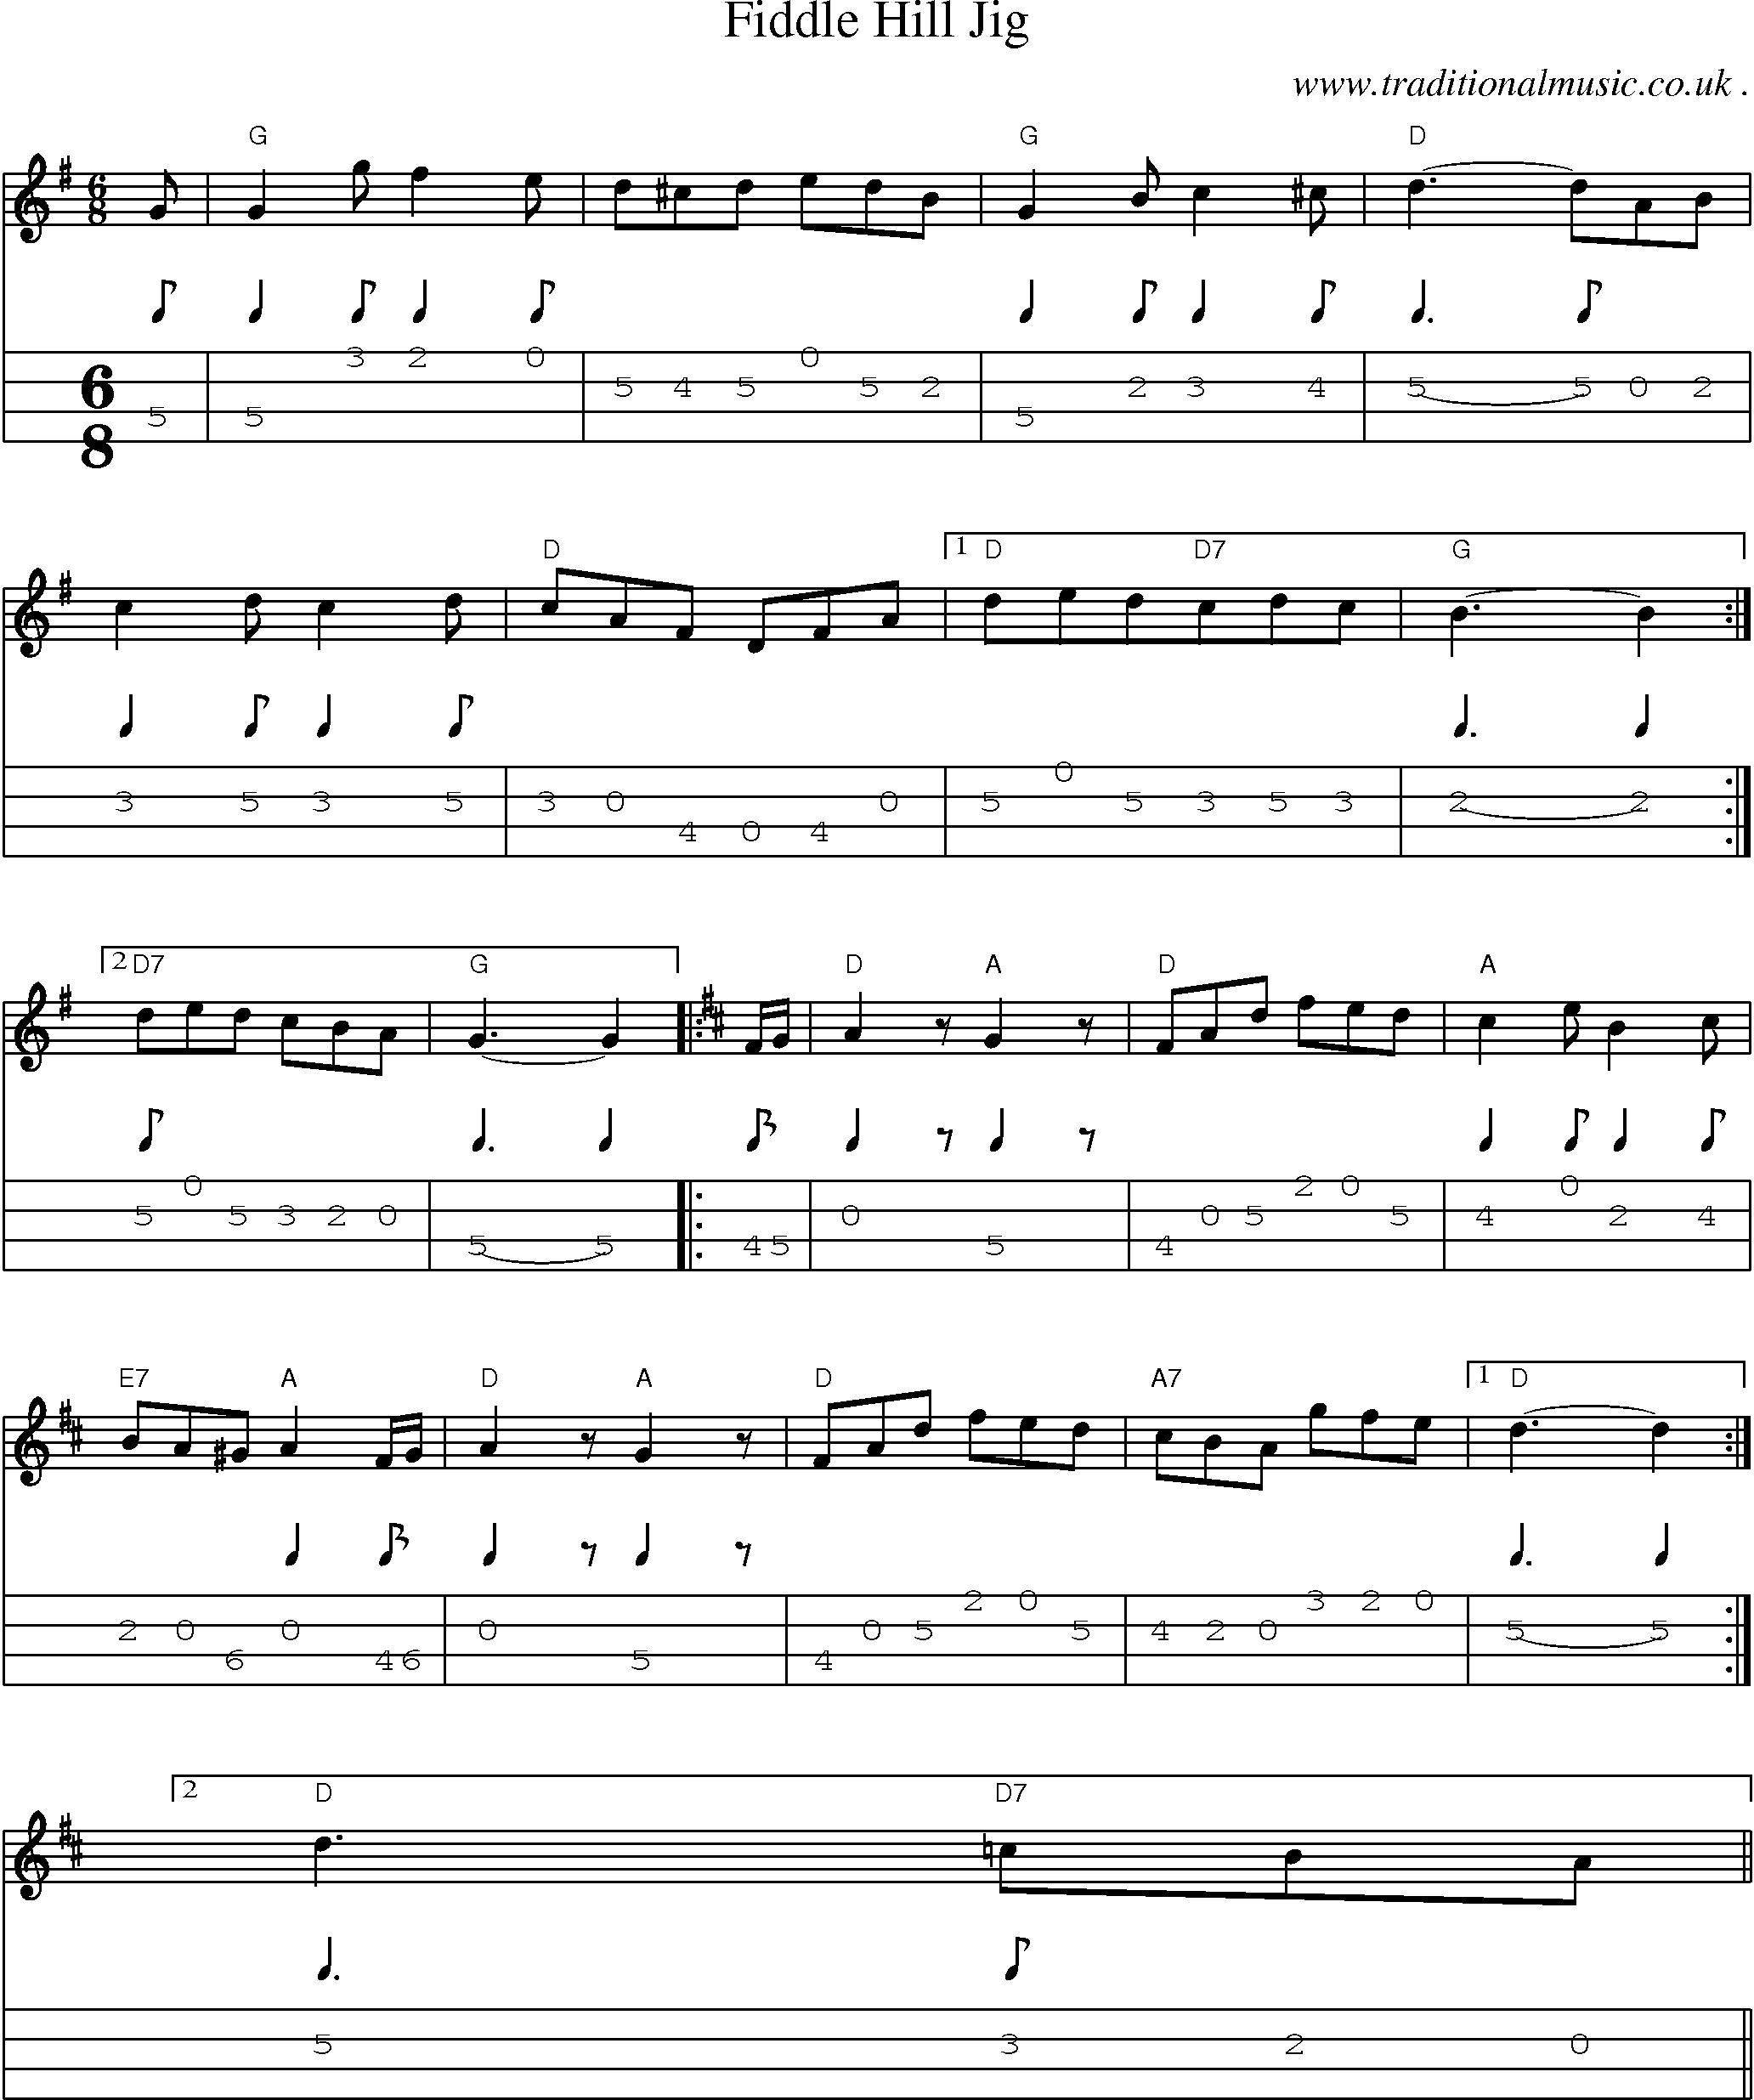 Sheet-Music and Mandolin Tabs for Fiddle Hill Jig